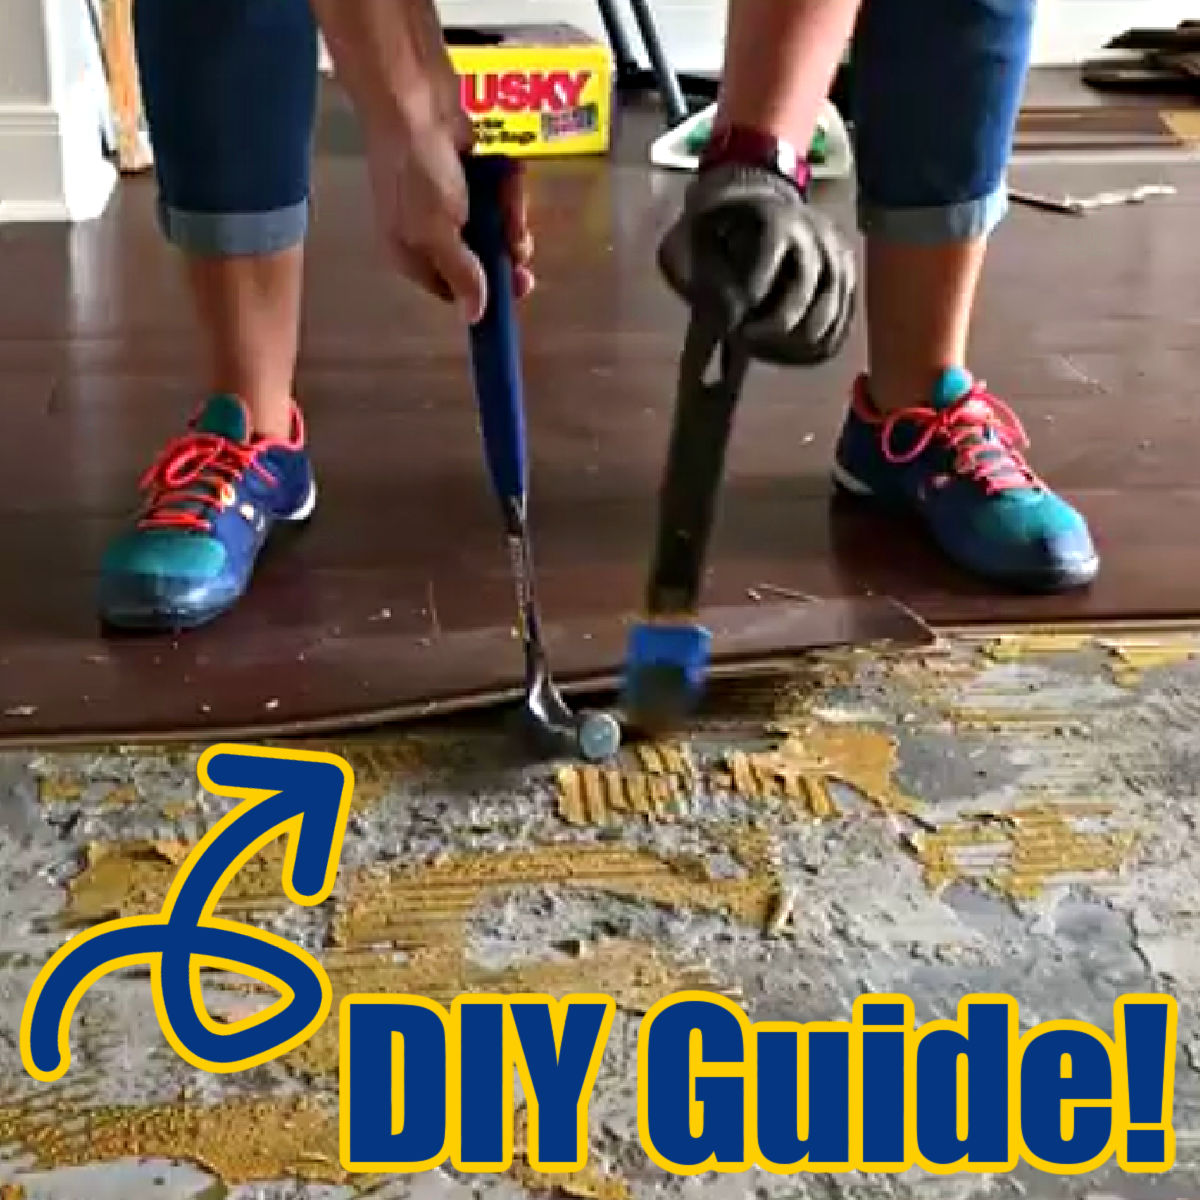 How To Remove Glued Wood Flooring Easy